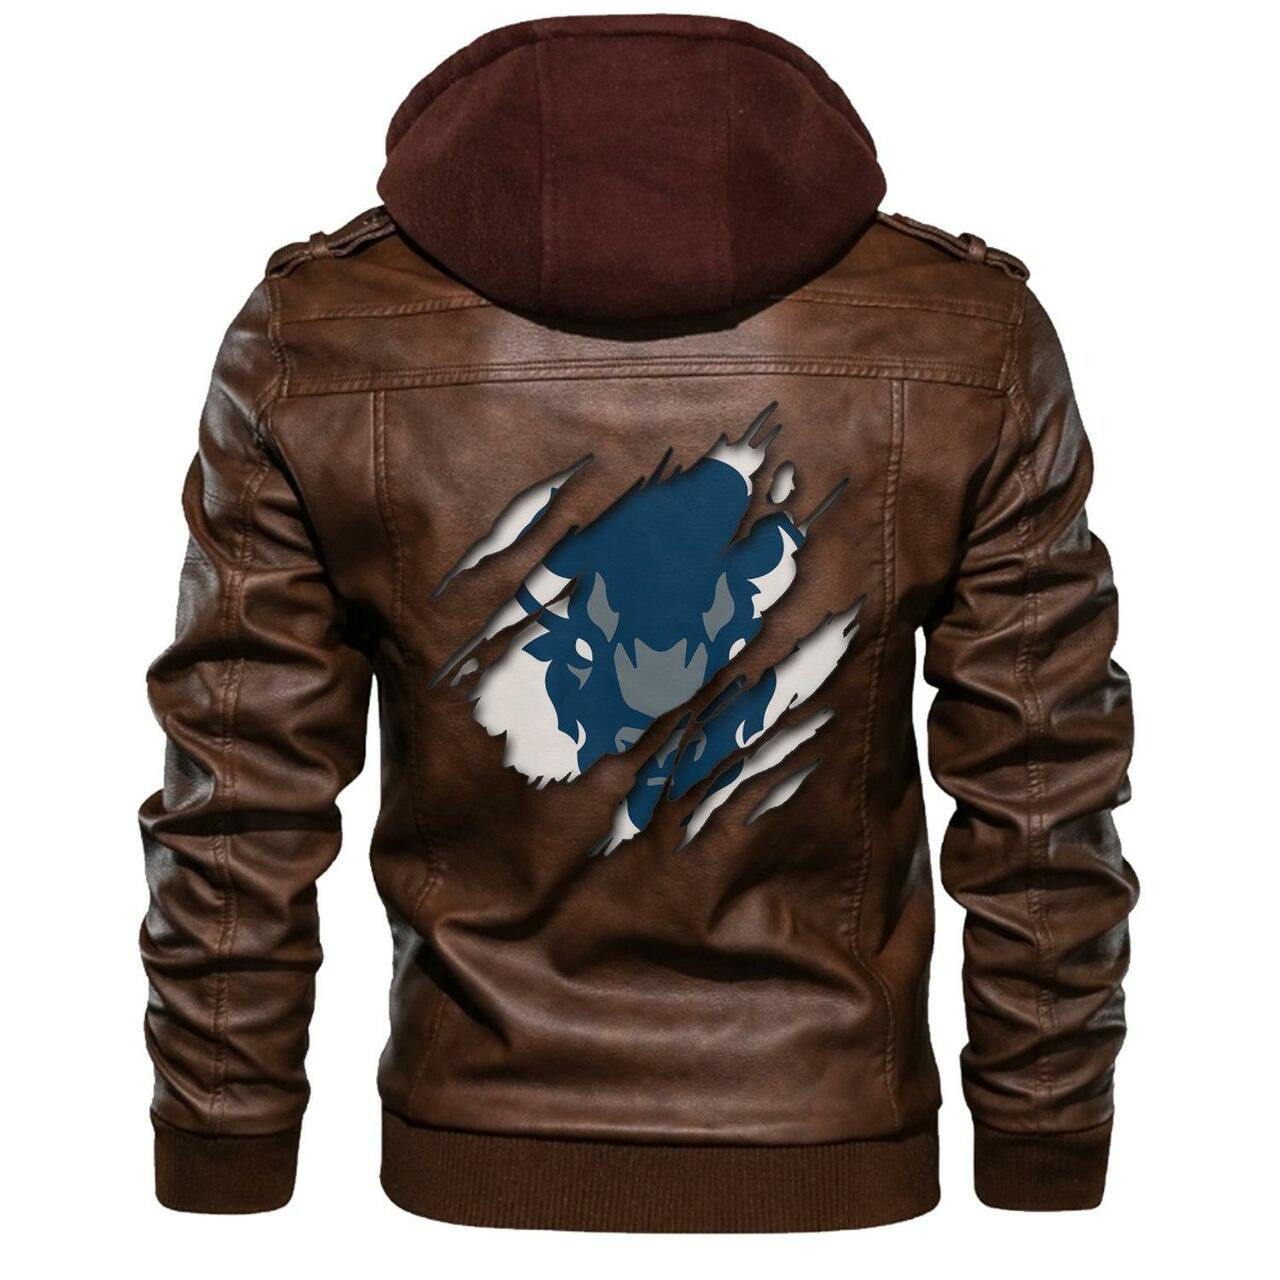 Check out and find the right leather jacket below 115